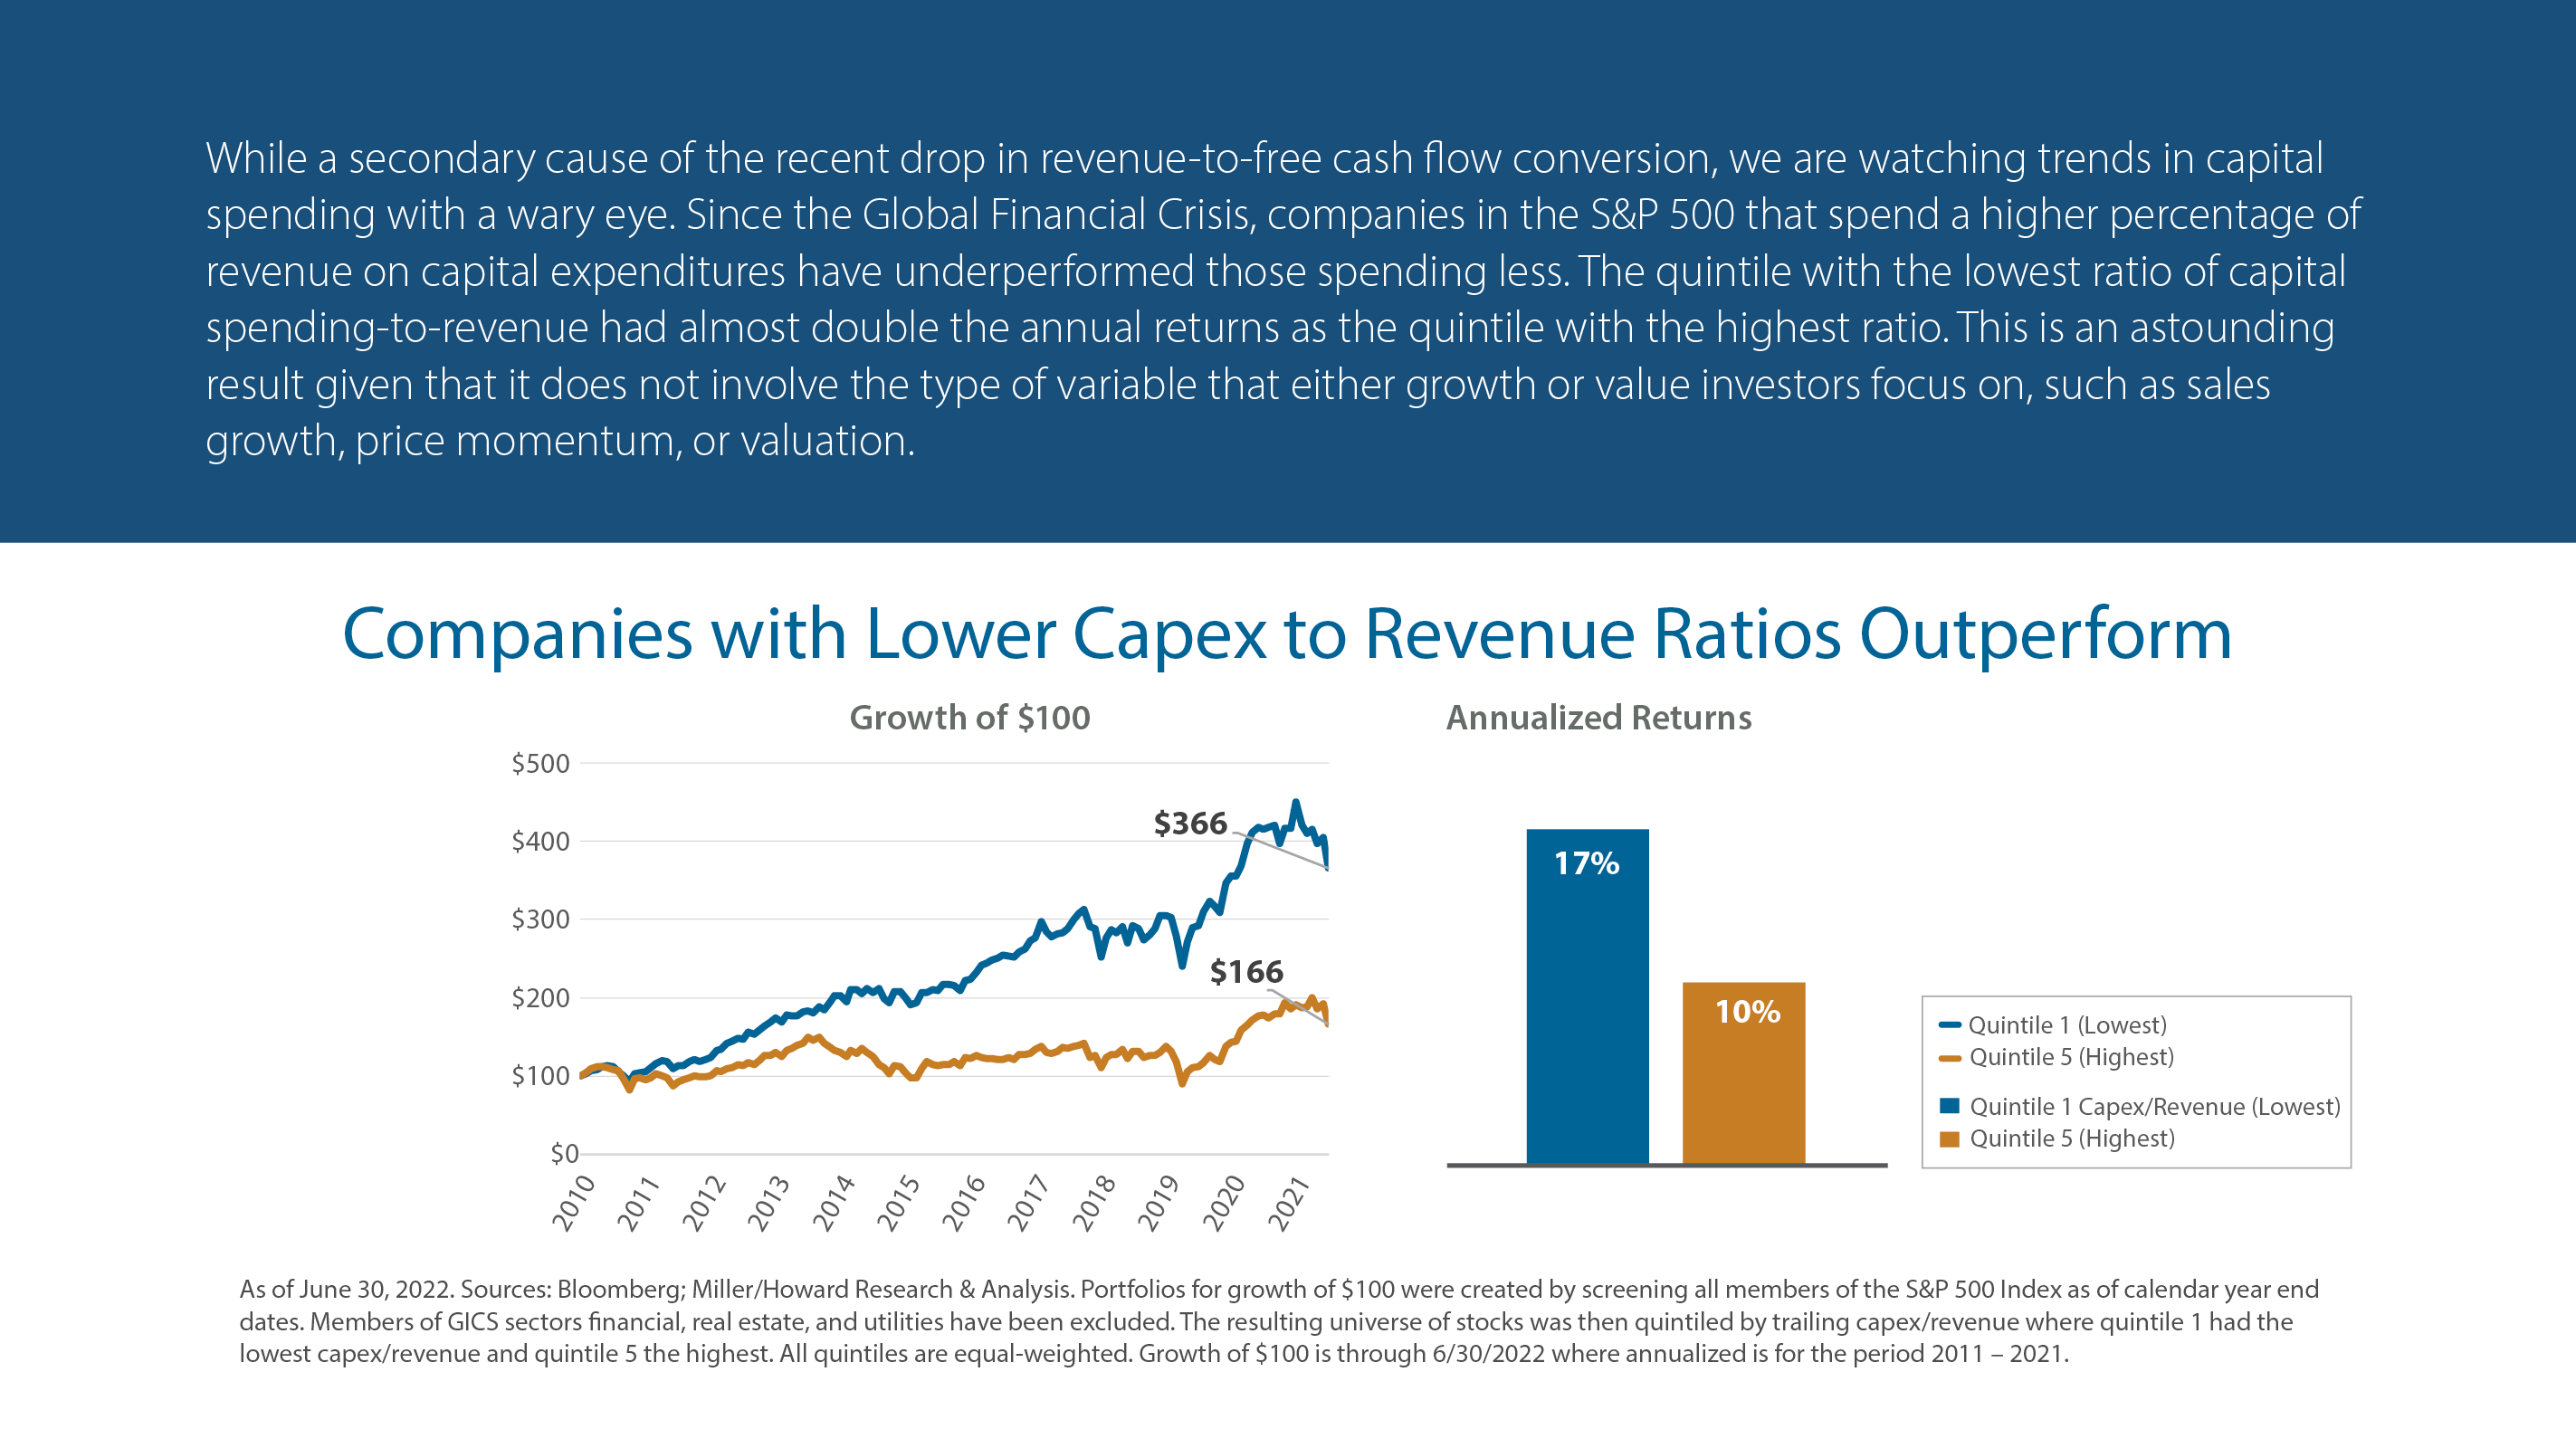 Companies with Lower Capex to Revenue Ratios Outperform